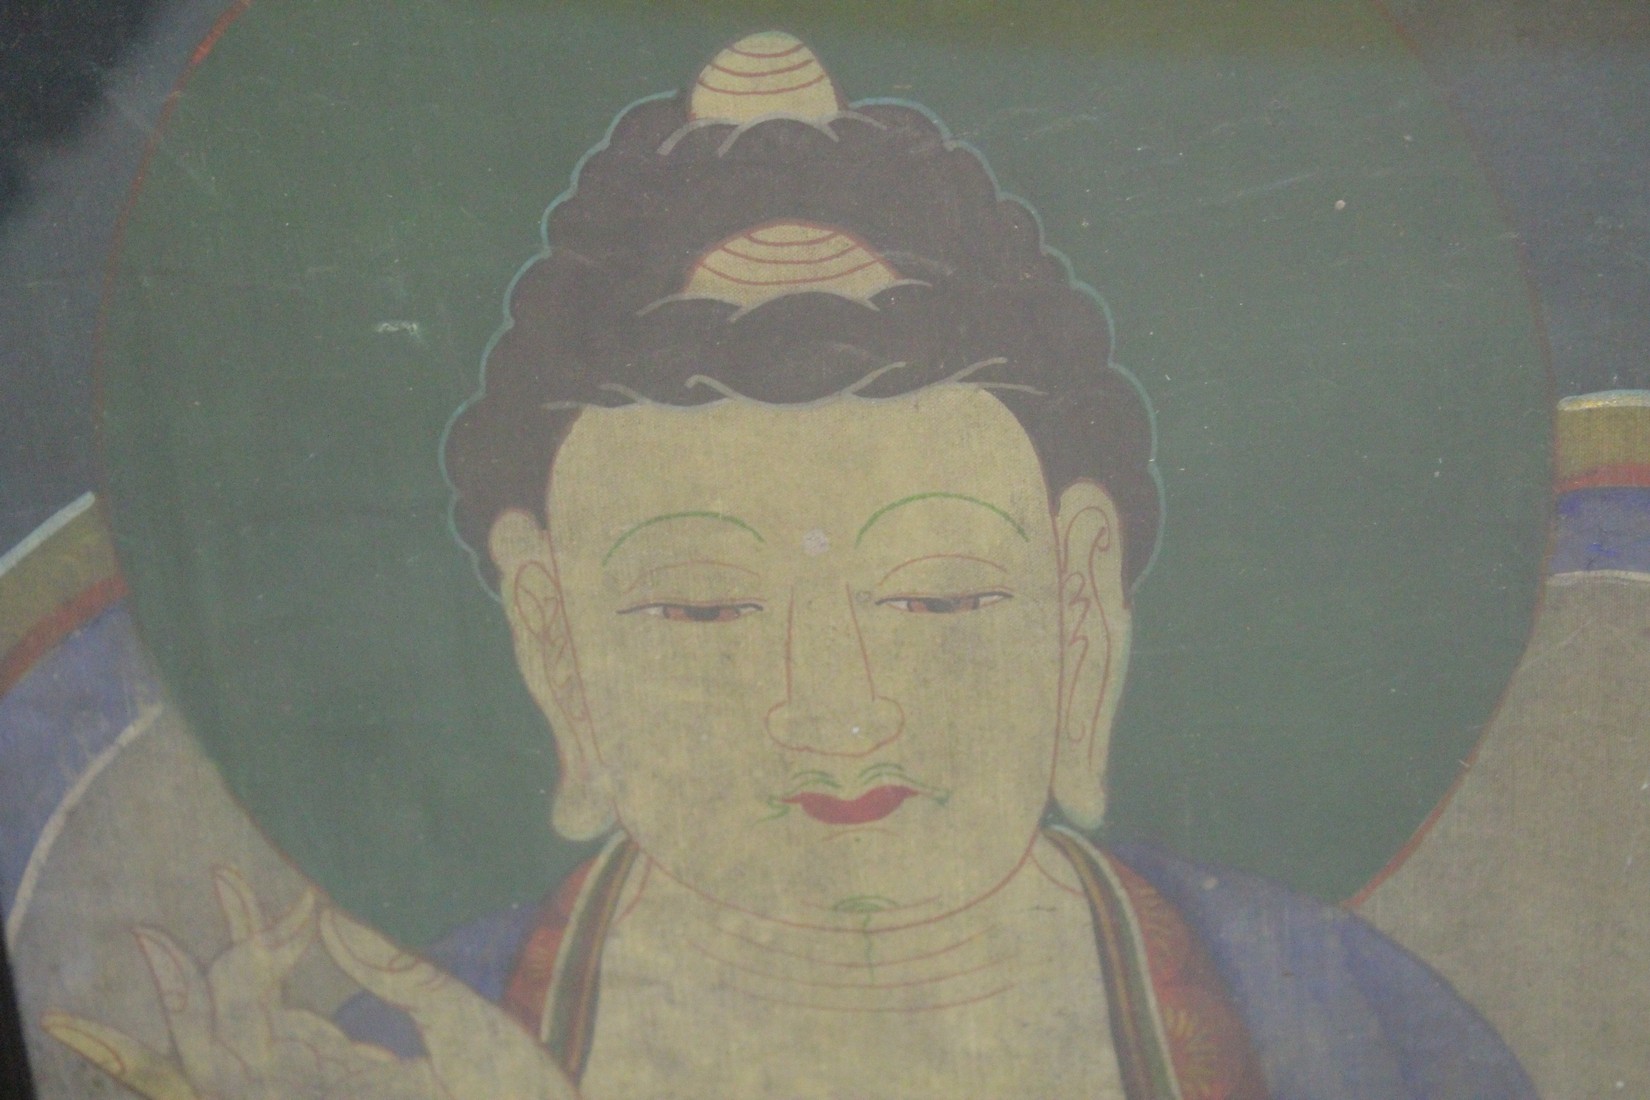 A FINE 19TH CENTURY PAINTING 'FIVE BUDDHAS', framed and glazed, image 71cm x 119.5cm. - Image 6 of 6